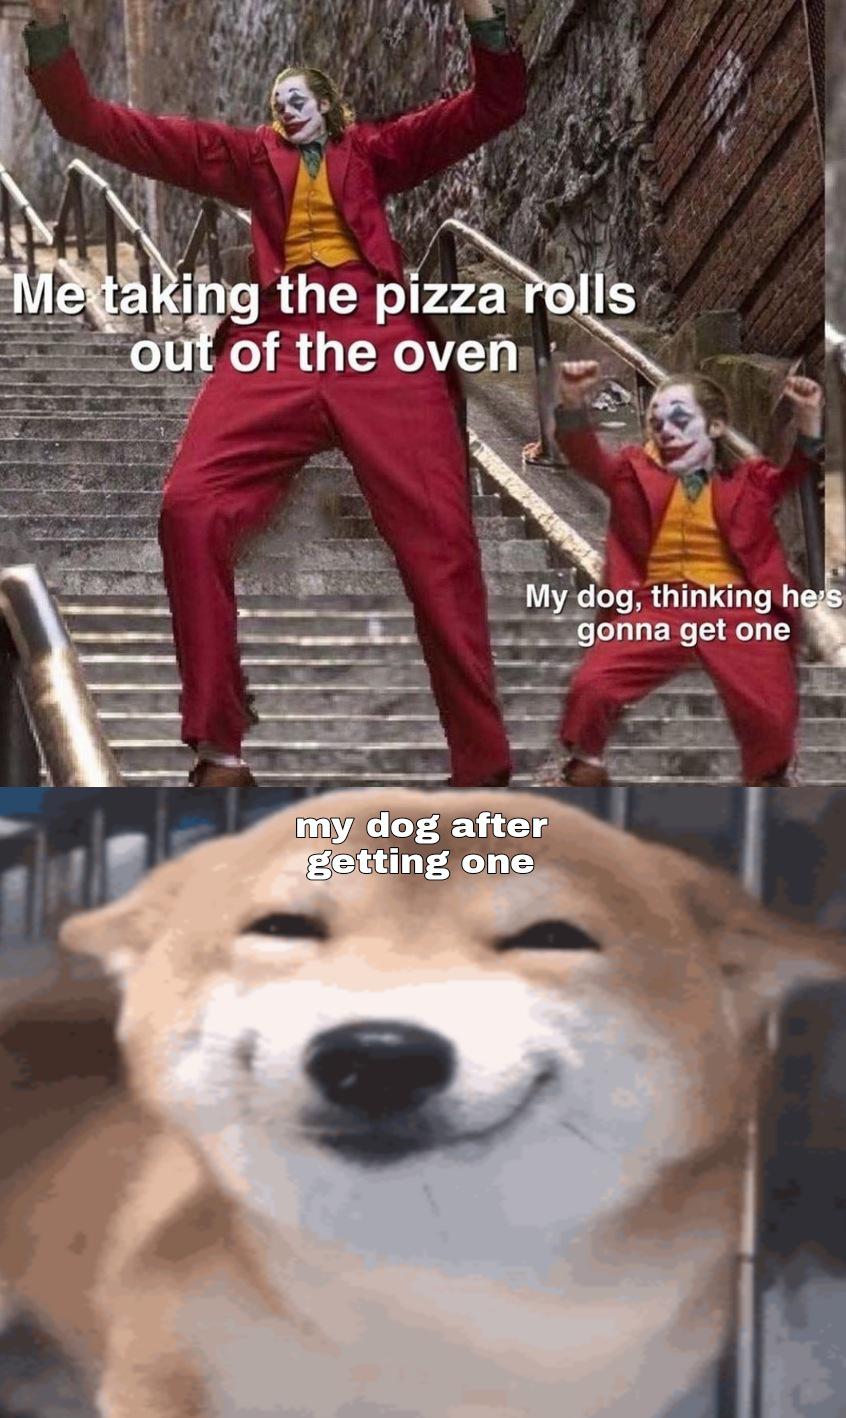 joker stairsmeme - Me taking the pizza rolls out of the oven My dog, thinking he's gonna get one my dog after getting one